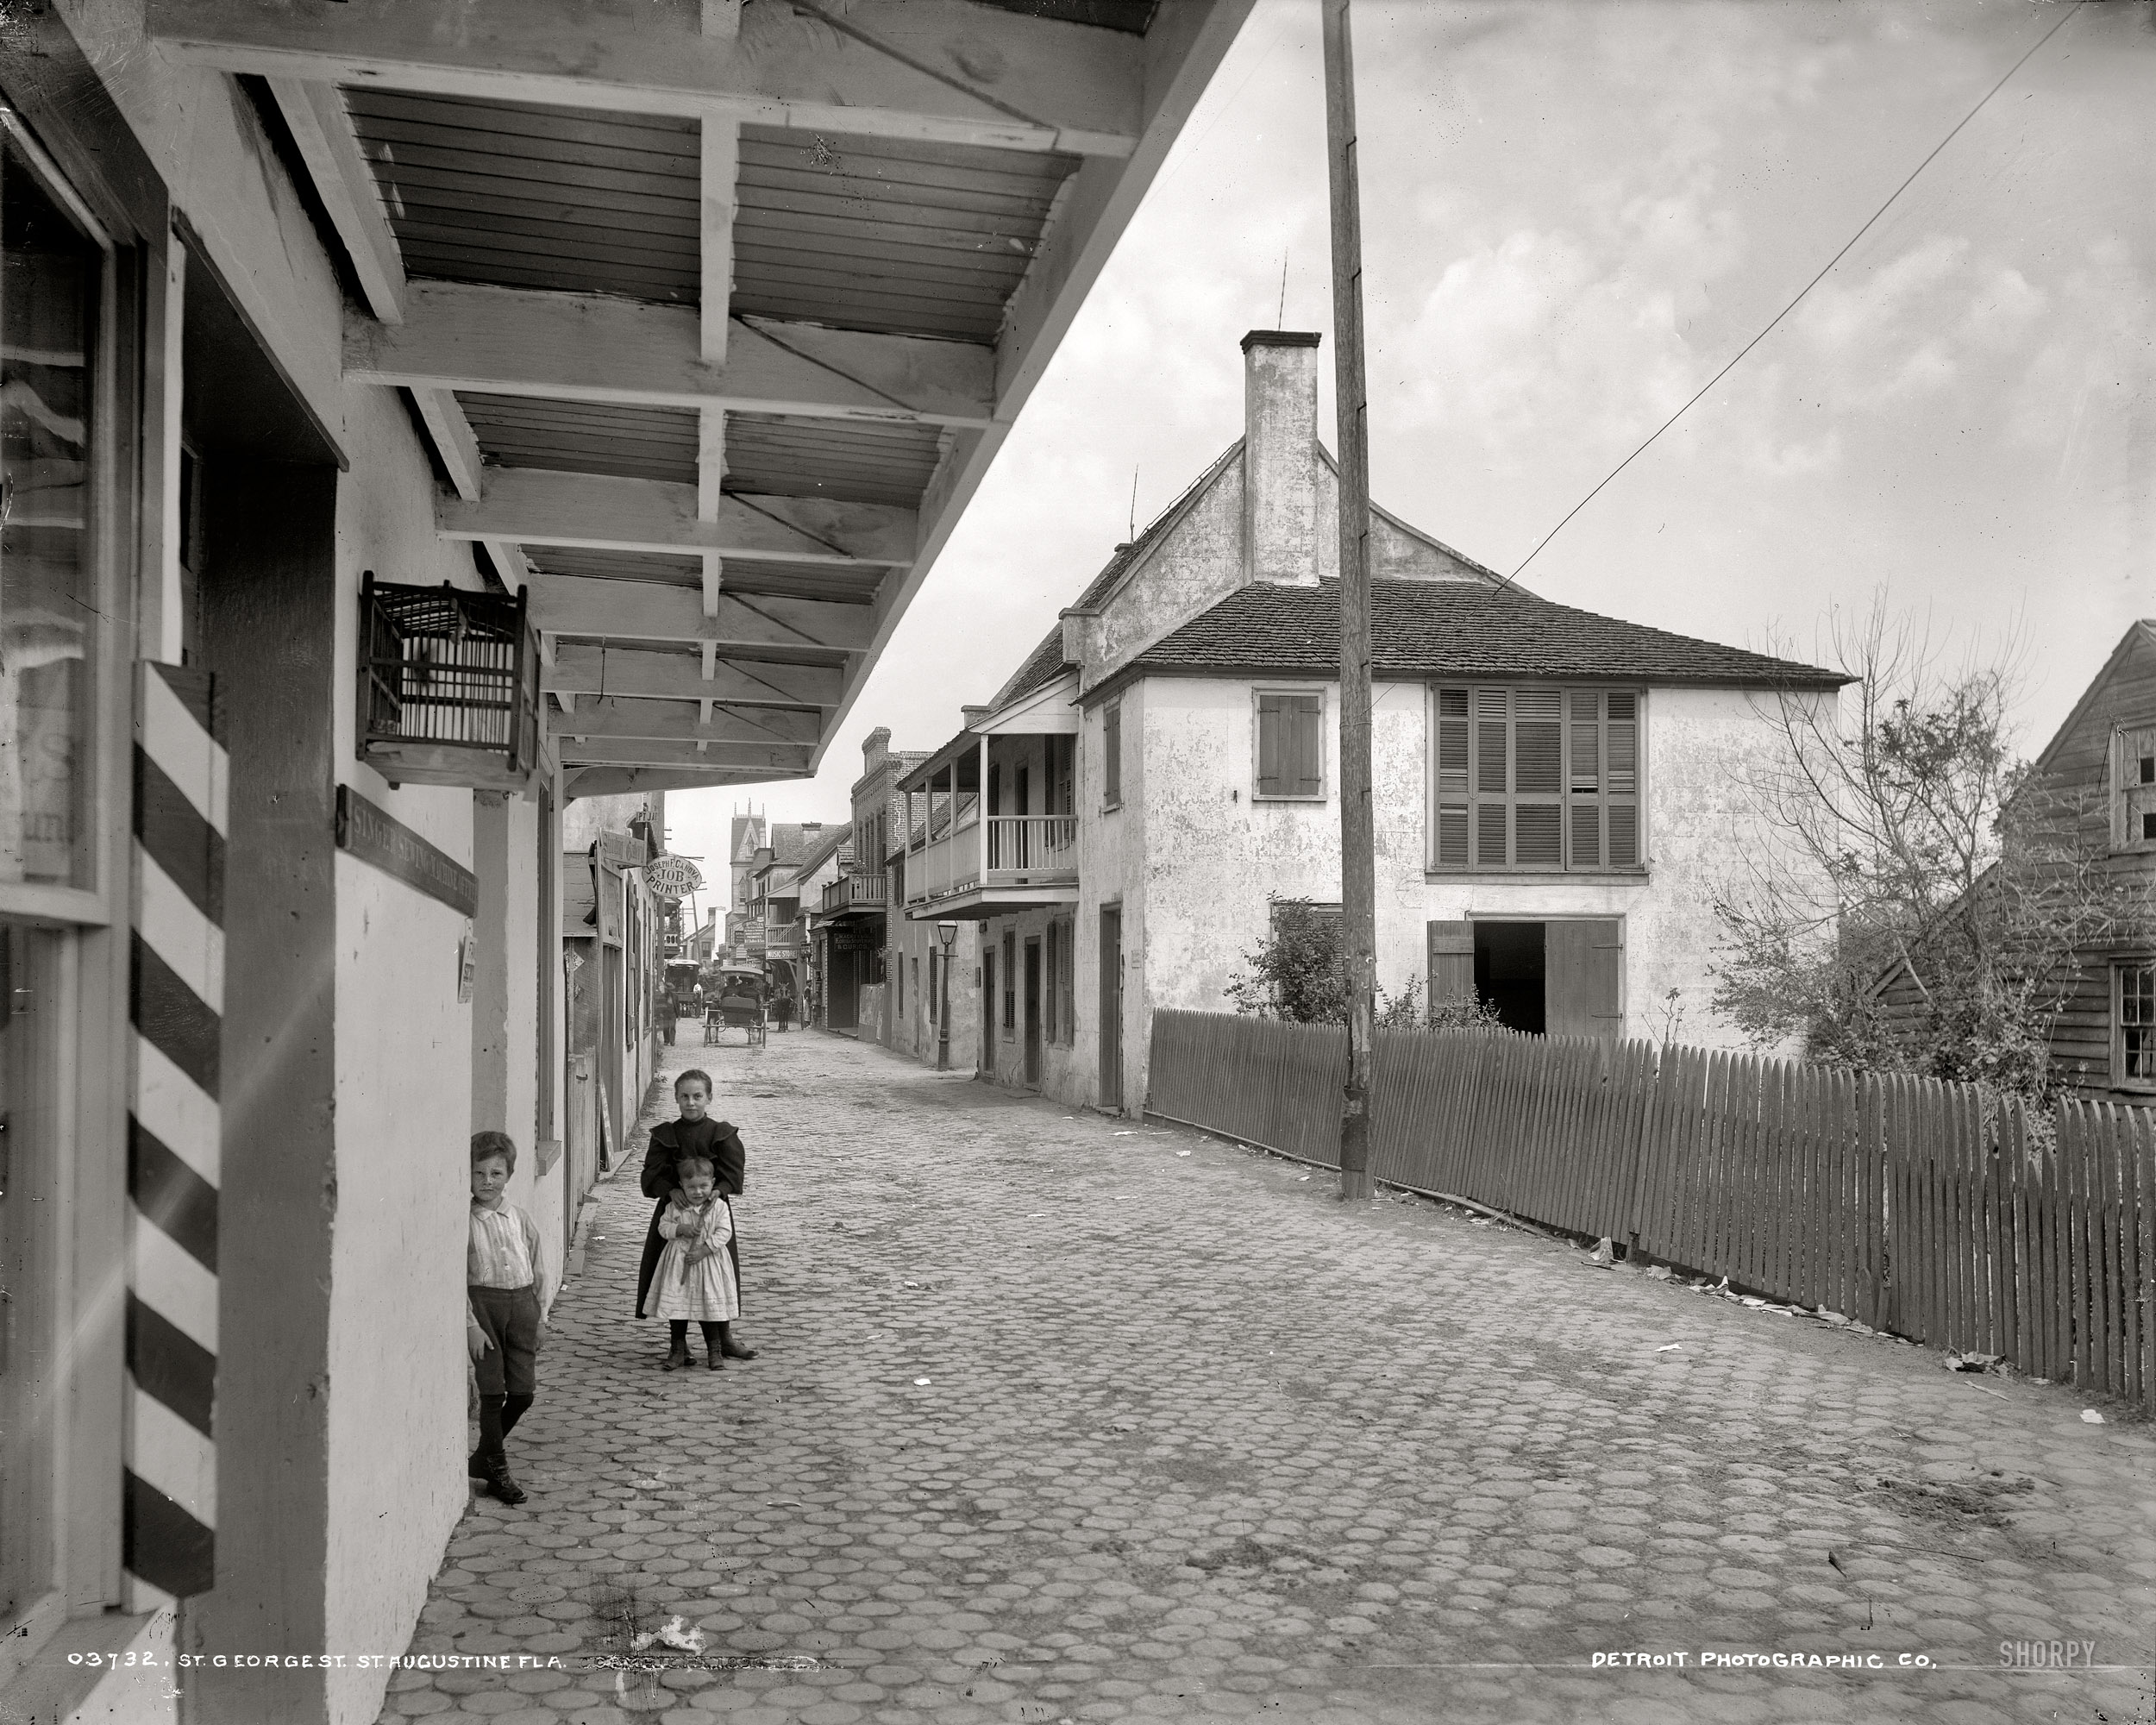 Florida circa 1894. "St. George Street, St. Augustine." 8x10 inch glass negative by William Henry Jackson. View full size.